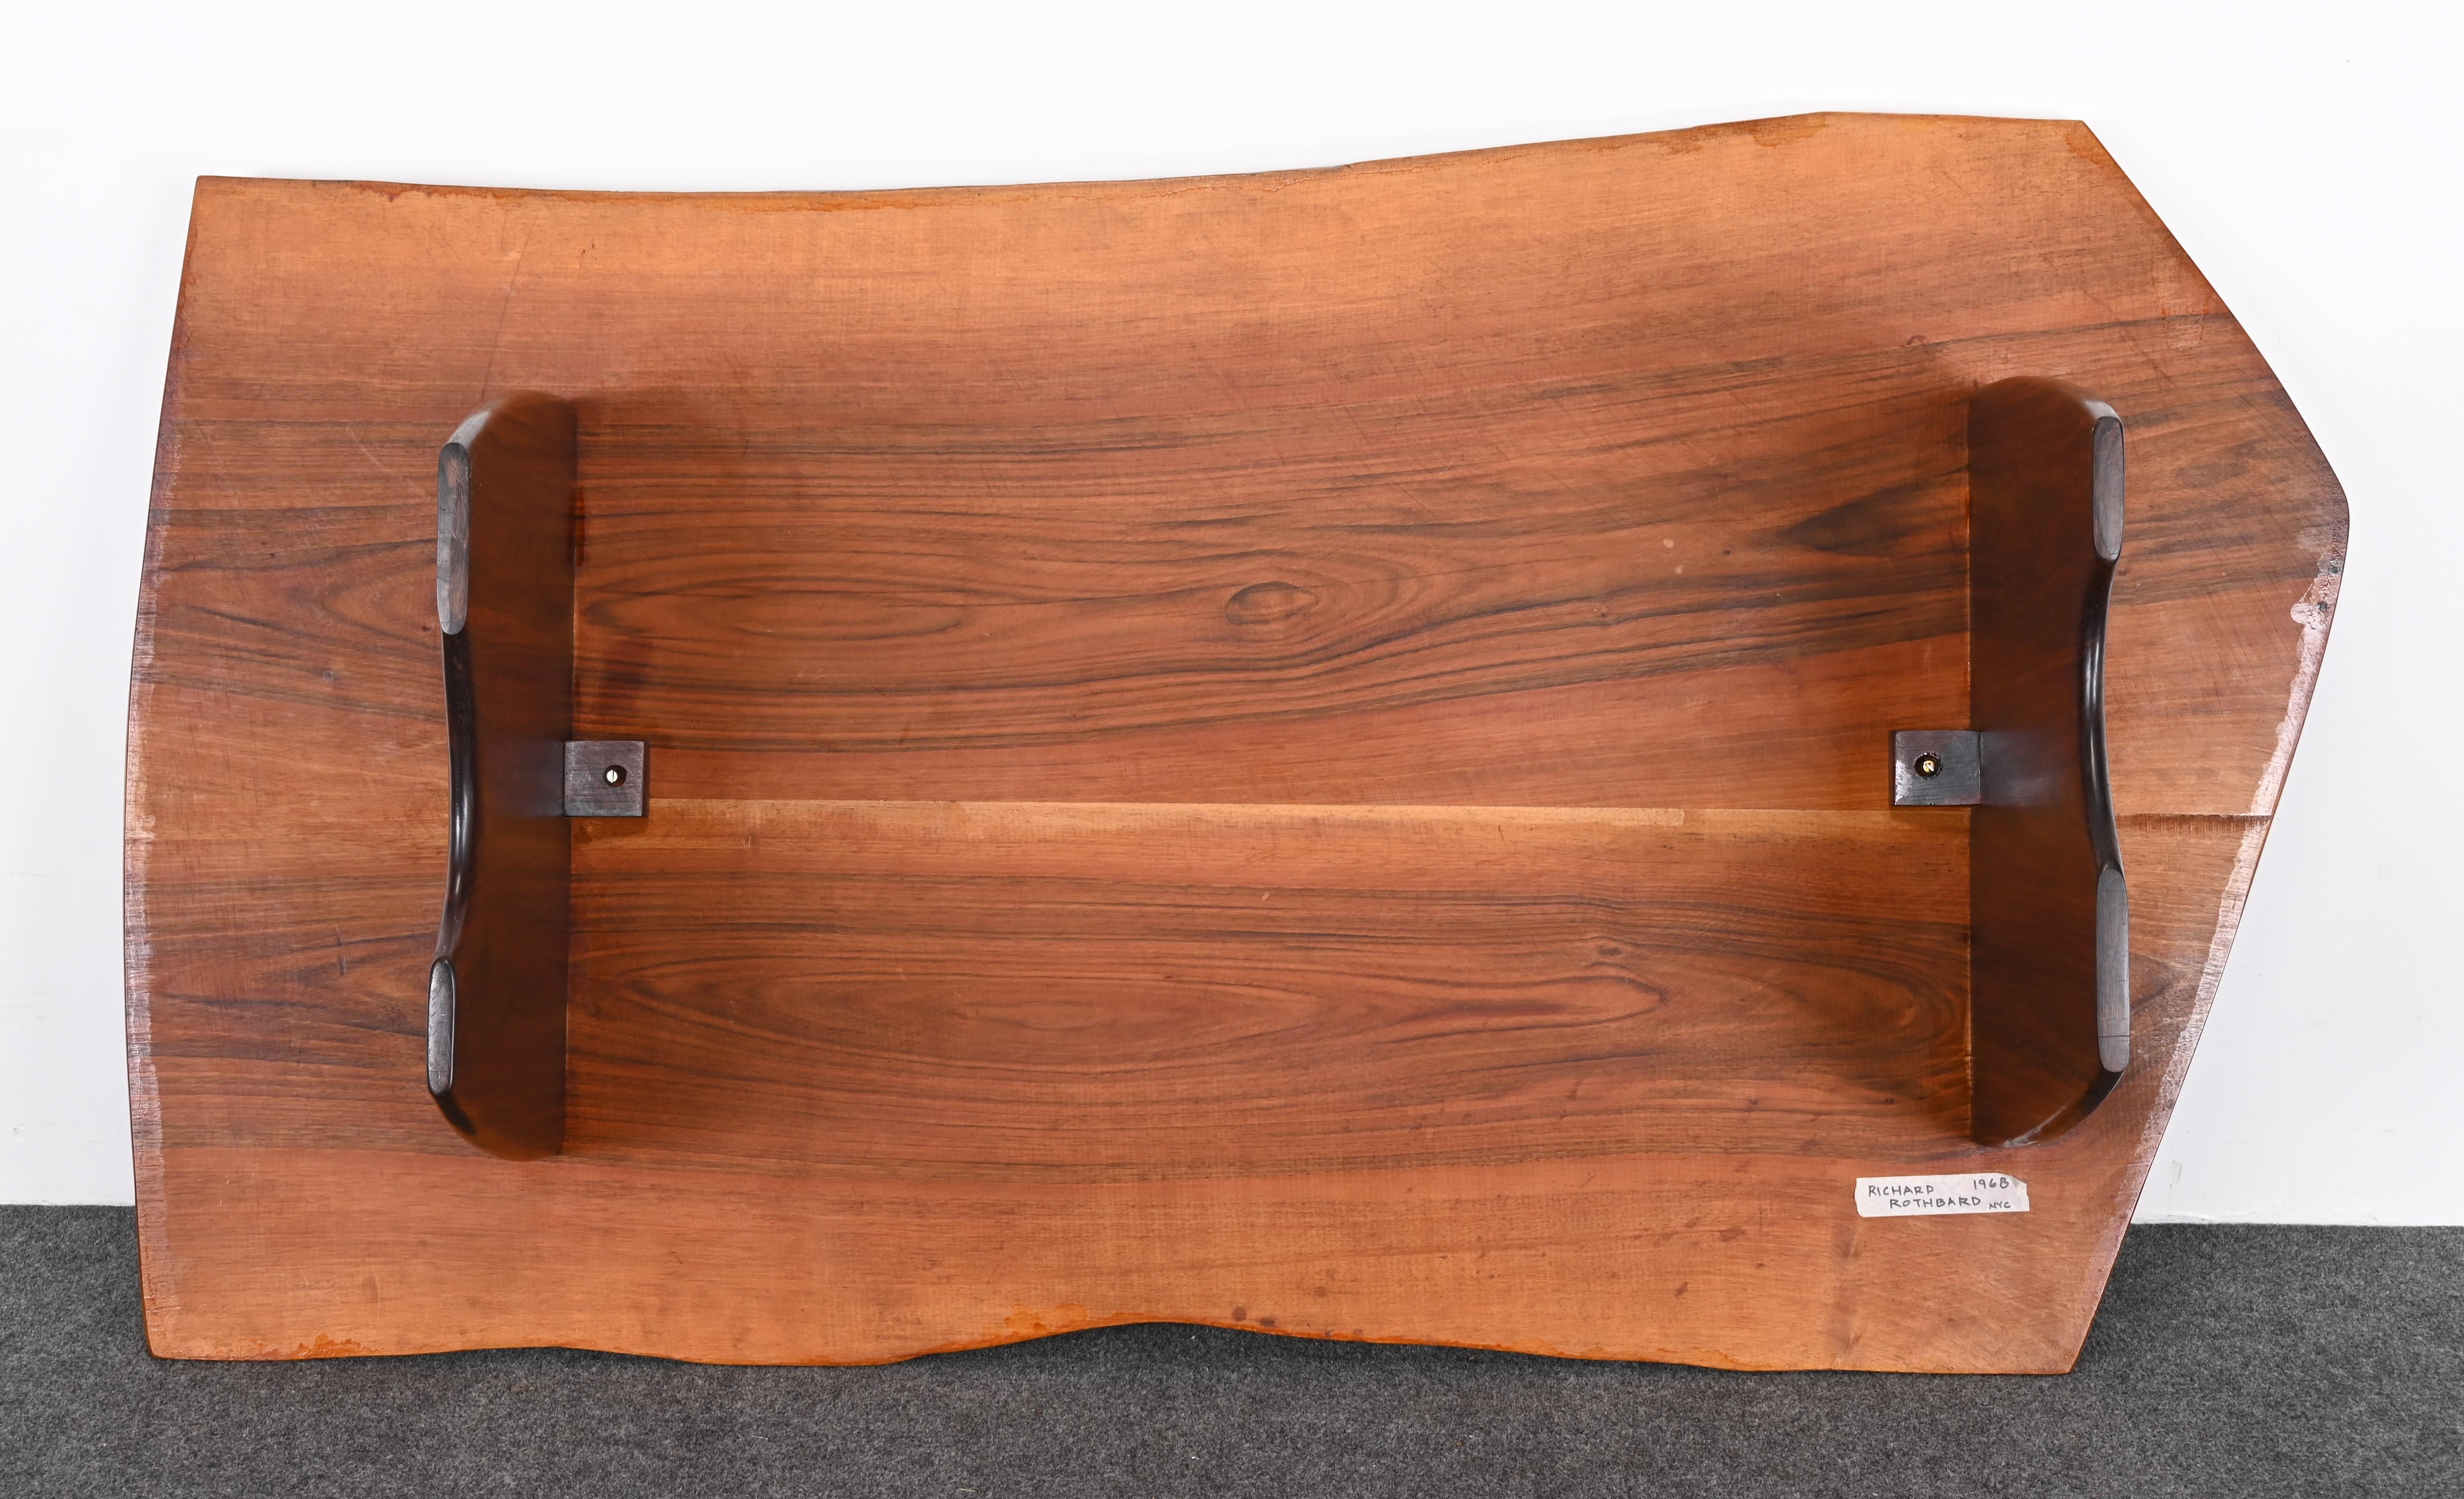 Live Edge Solid Walnut and Rosewood Coffee Table by Richard Rothbard, 1968 For Sale 10